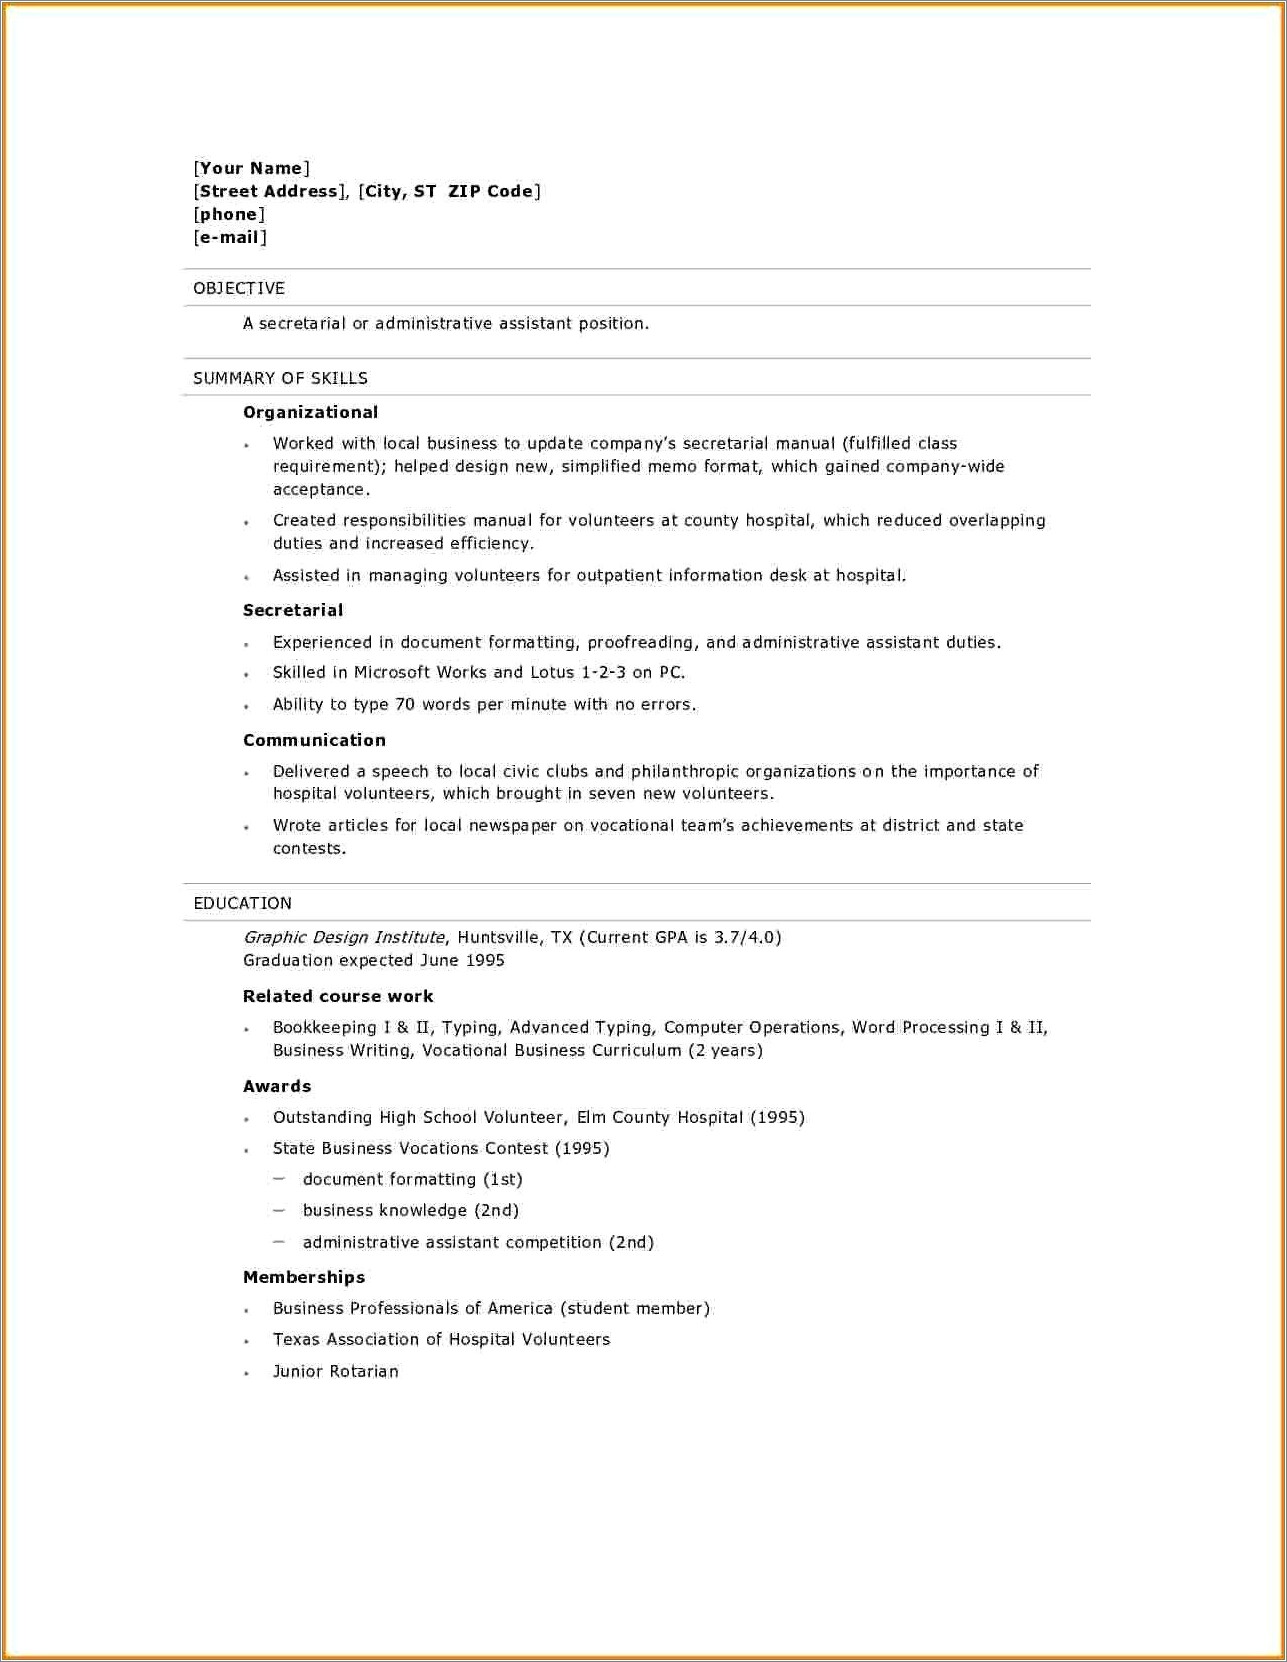 Sample Resume For High School Graduate Without Experience